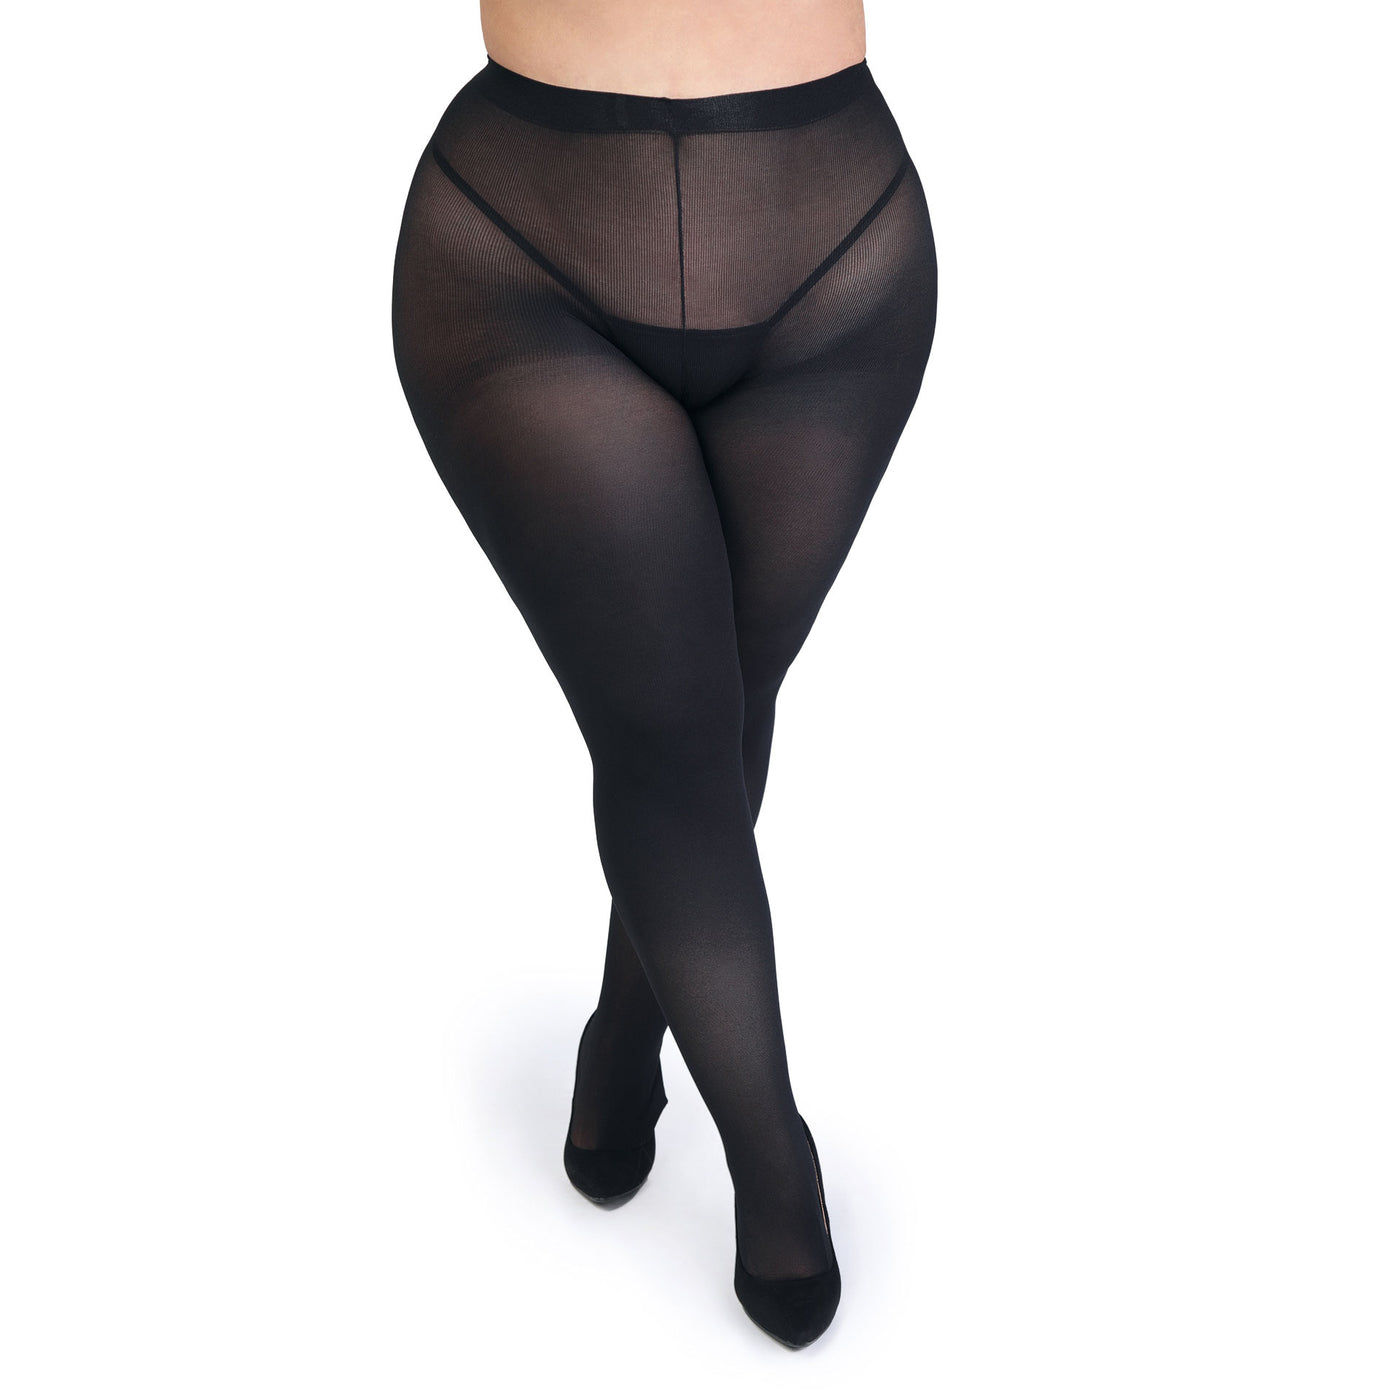 Fifty Shades of Grey Captivate Spanking Pantyhose - Curve Size - Black LHR-80298